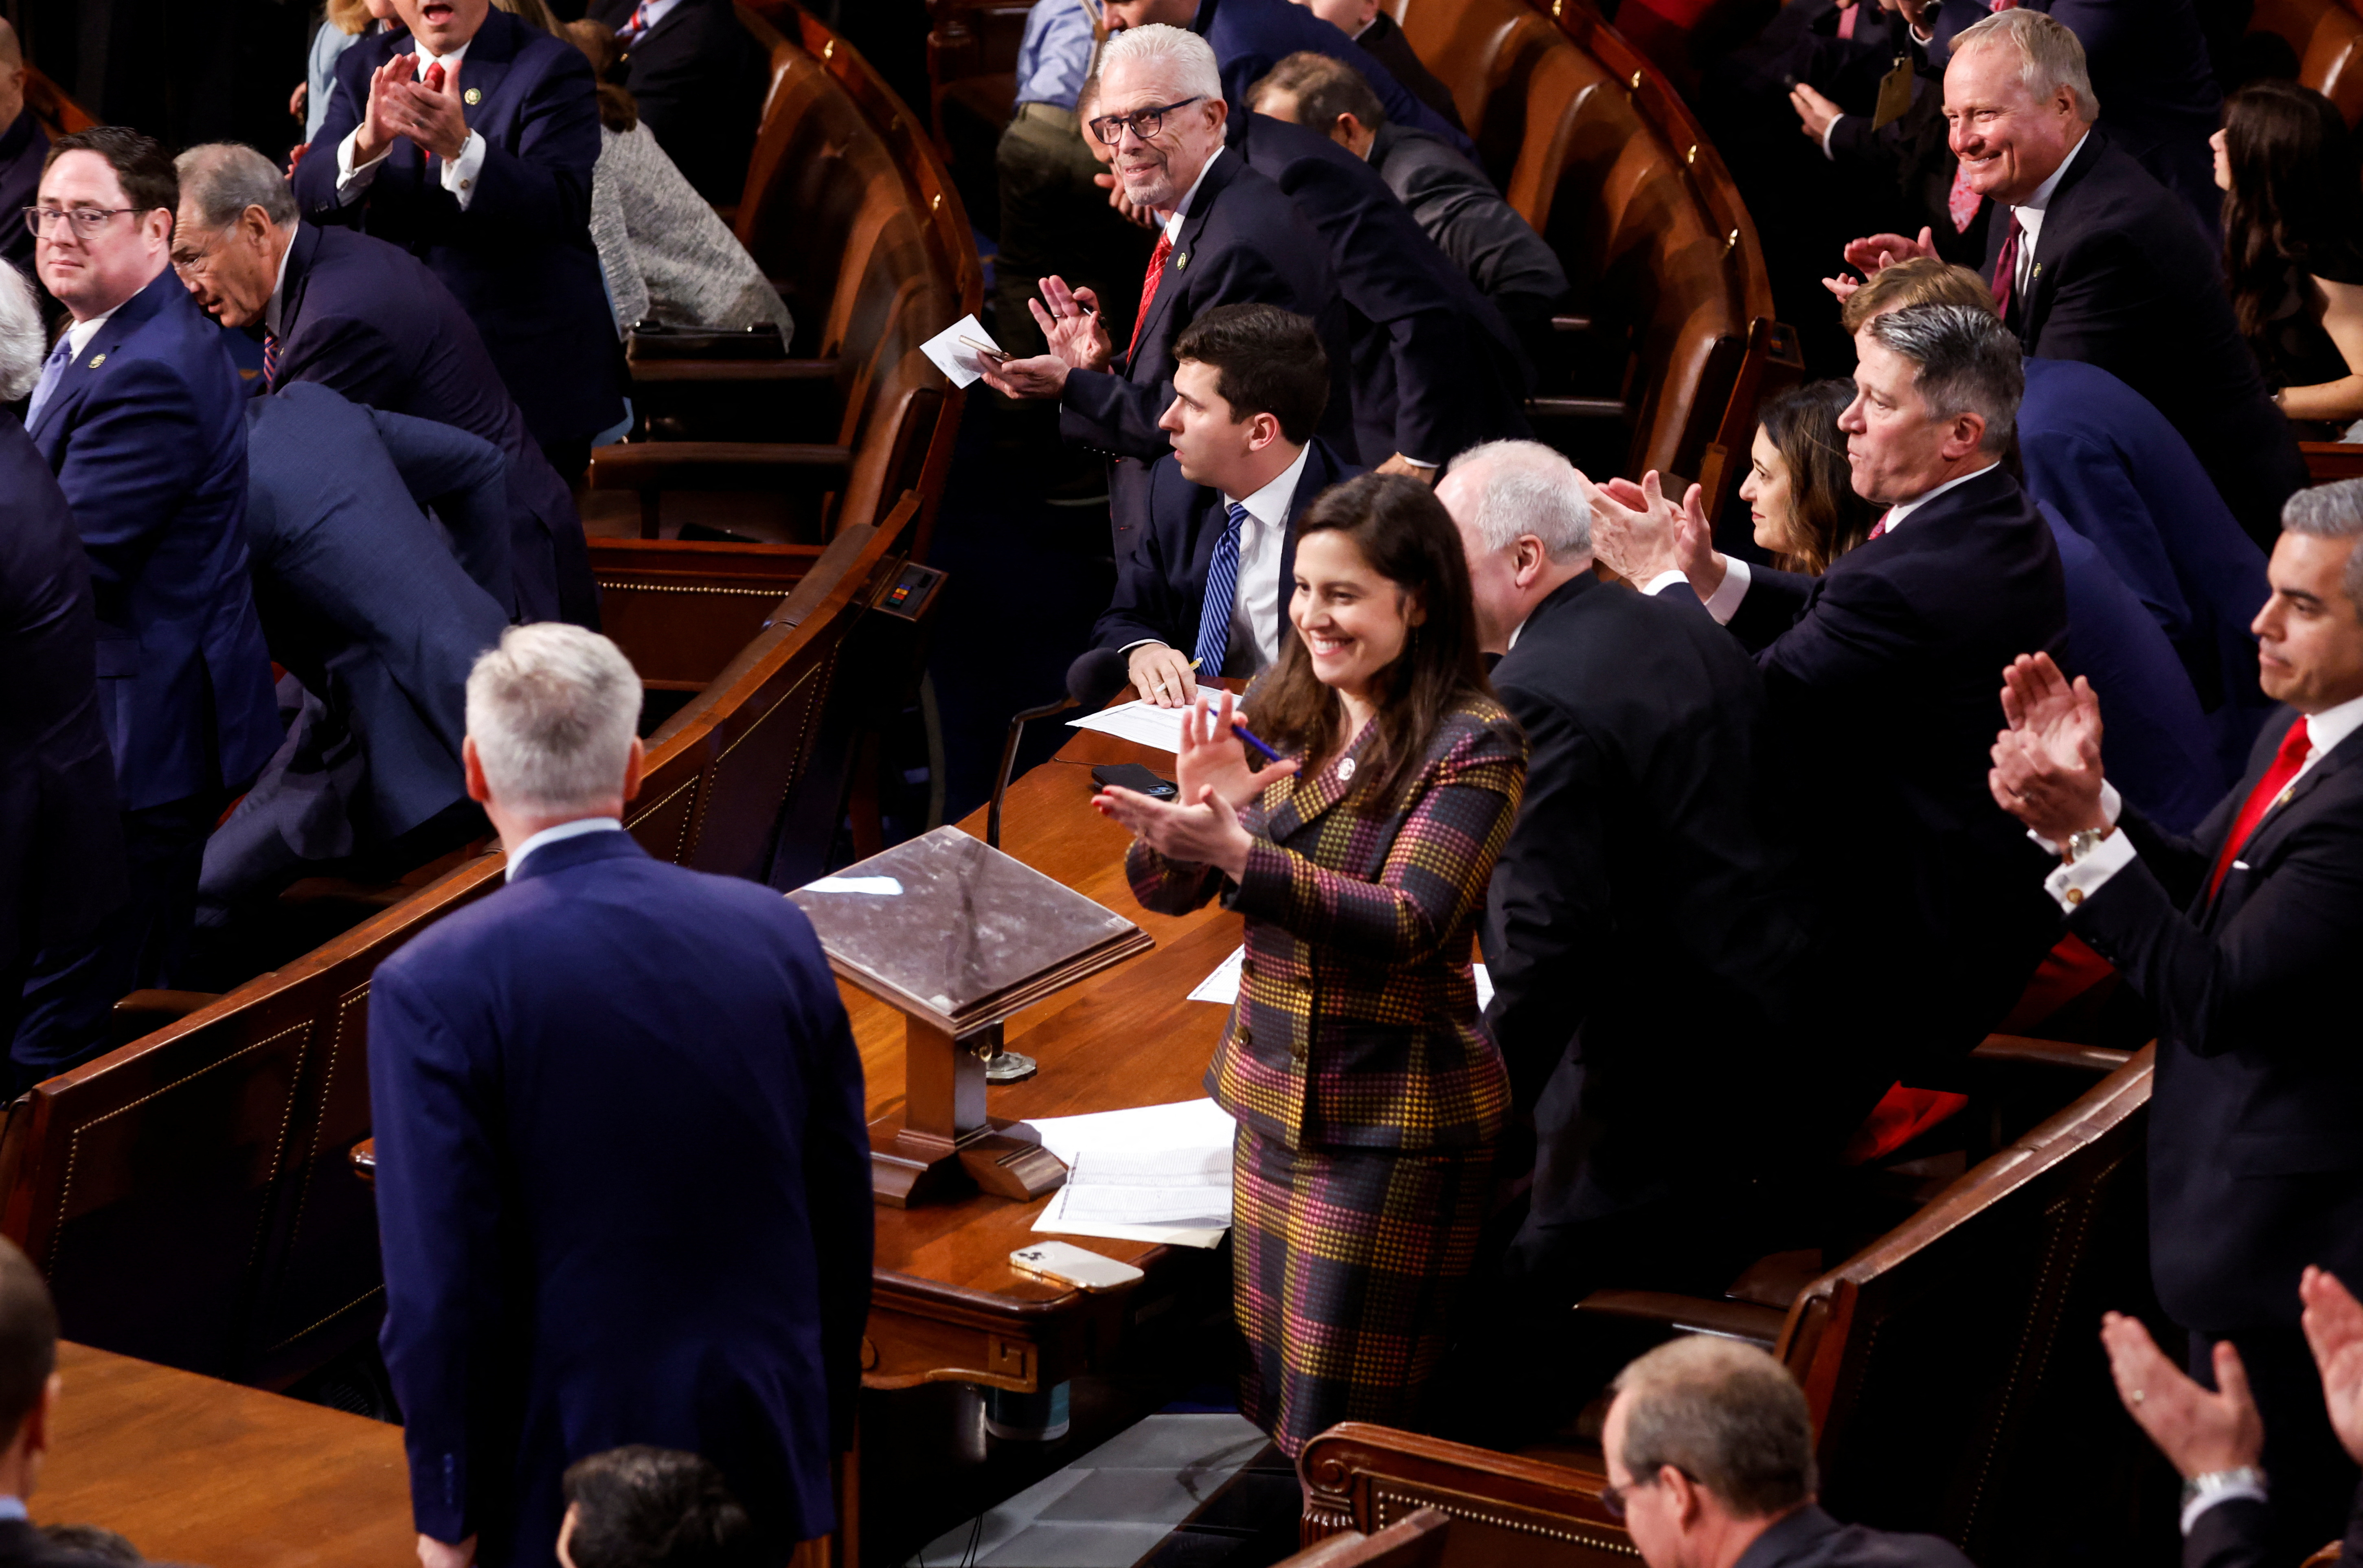 U.S. representatives gather to vote for their new Speaker of the House on the first day of the new Congress at the U.S. Capitol in Washington